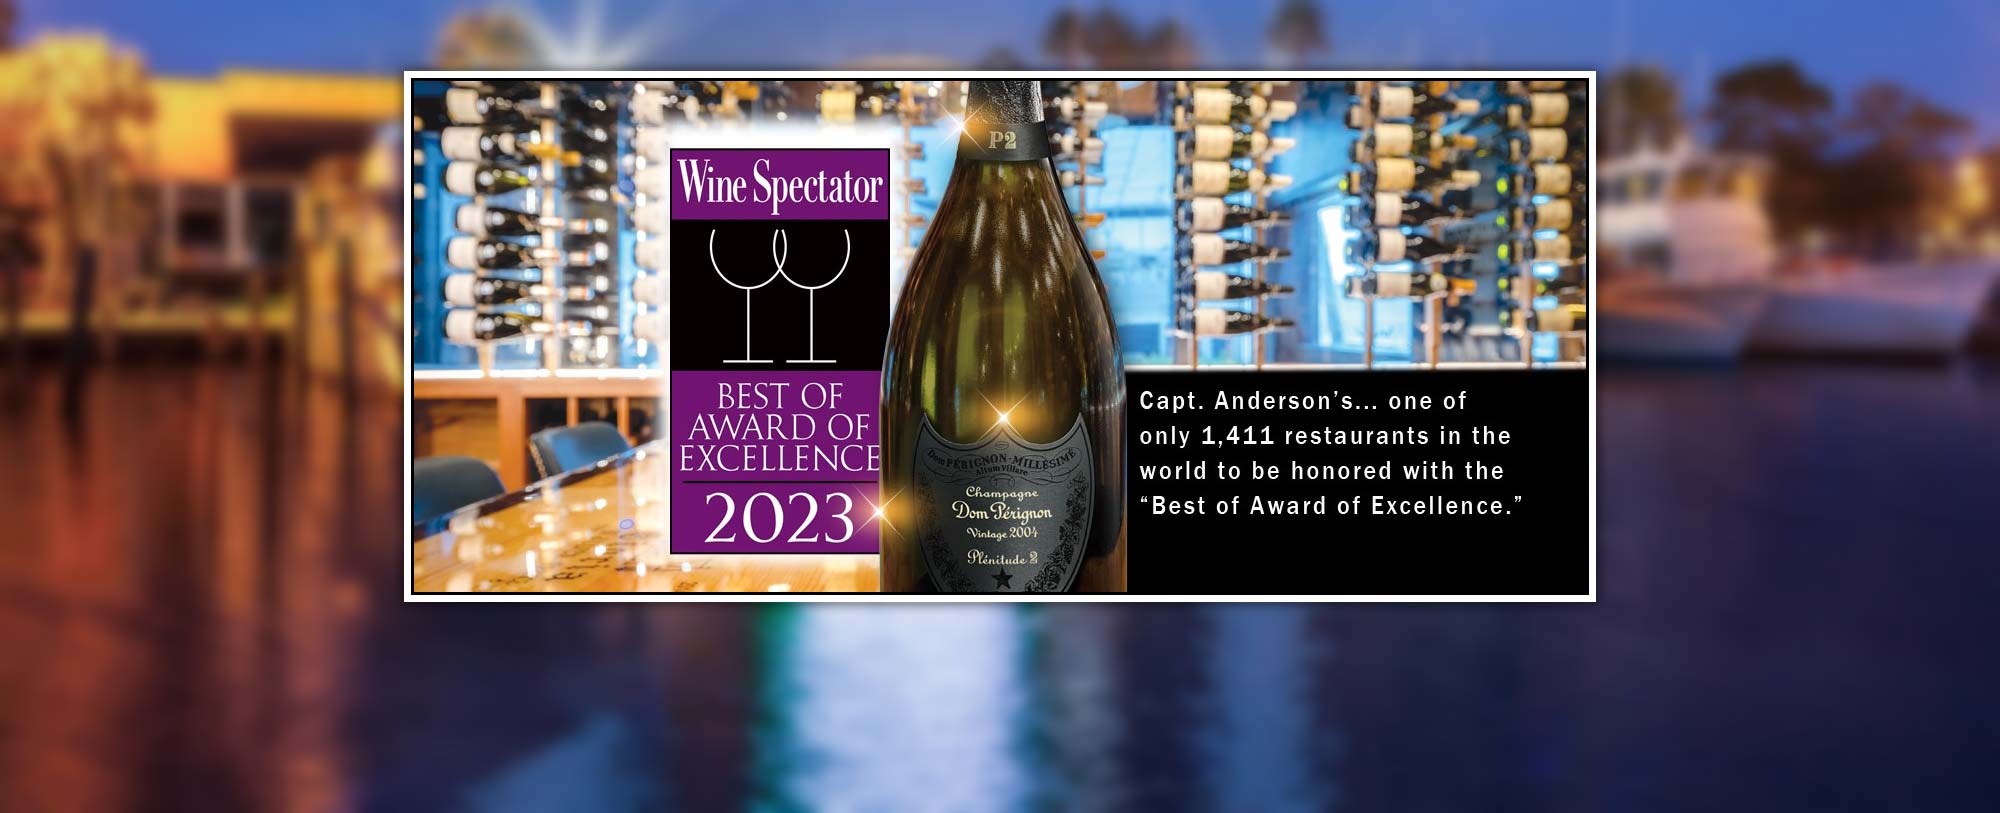 Wine Spectator - Best of Award of Excellence